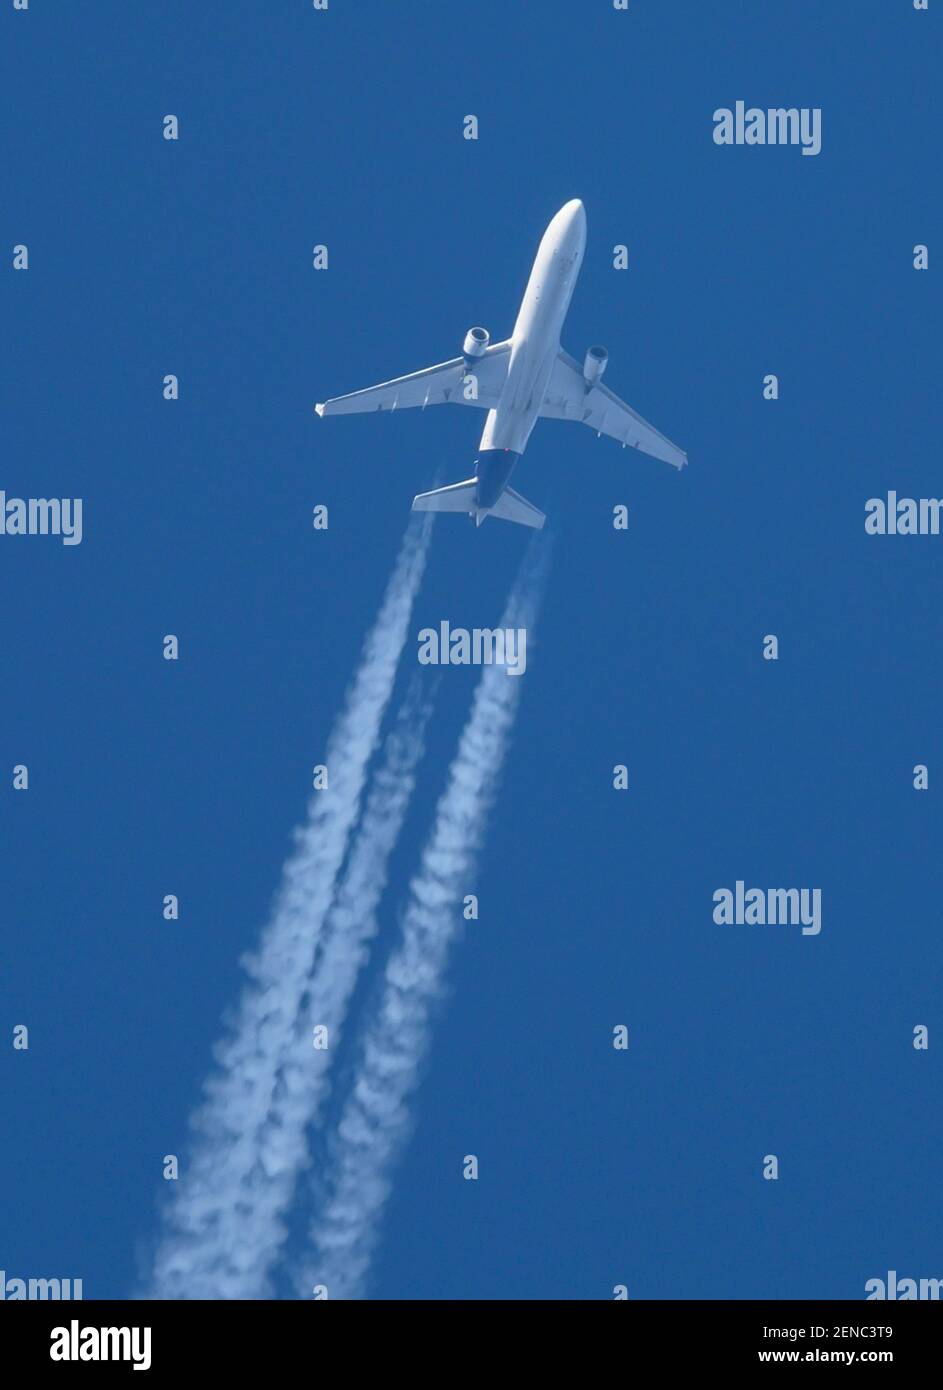 Wimbledon, London, UK. 26 February 2021. Lufthansa Cargo McDonnell Douglas MD-11F flies over London at 35,000ft from Chicago en route to Frankfurt. Credit: Malcolm Park/Alamy Live News. Stock Photo